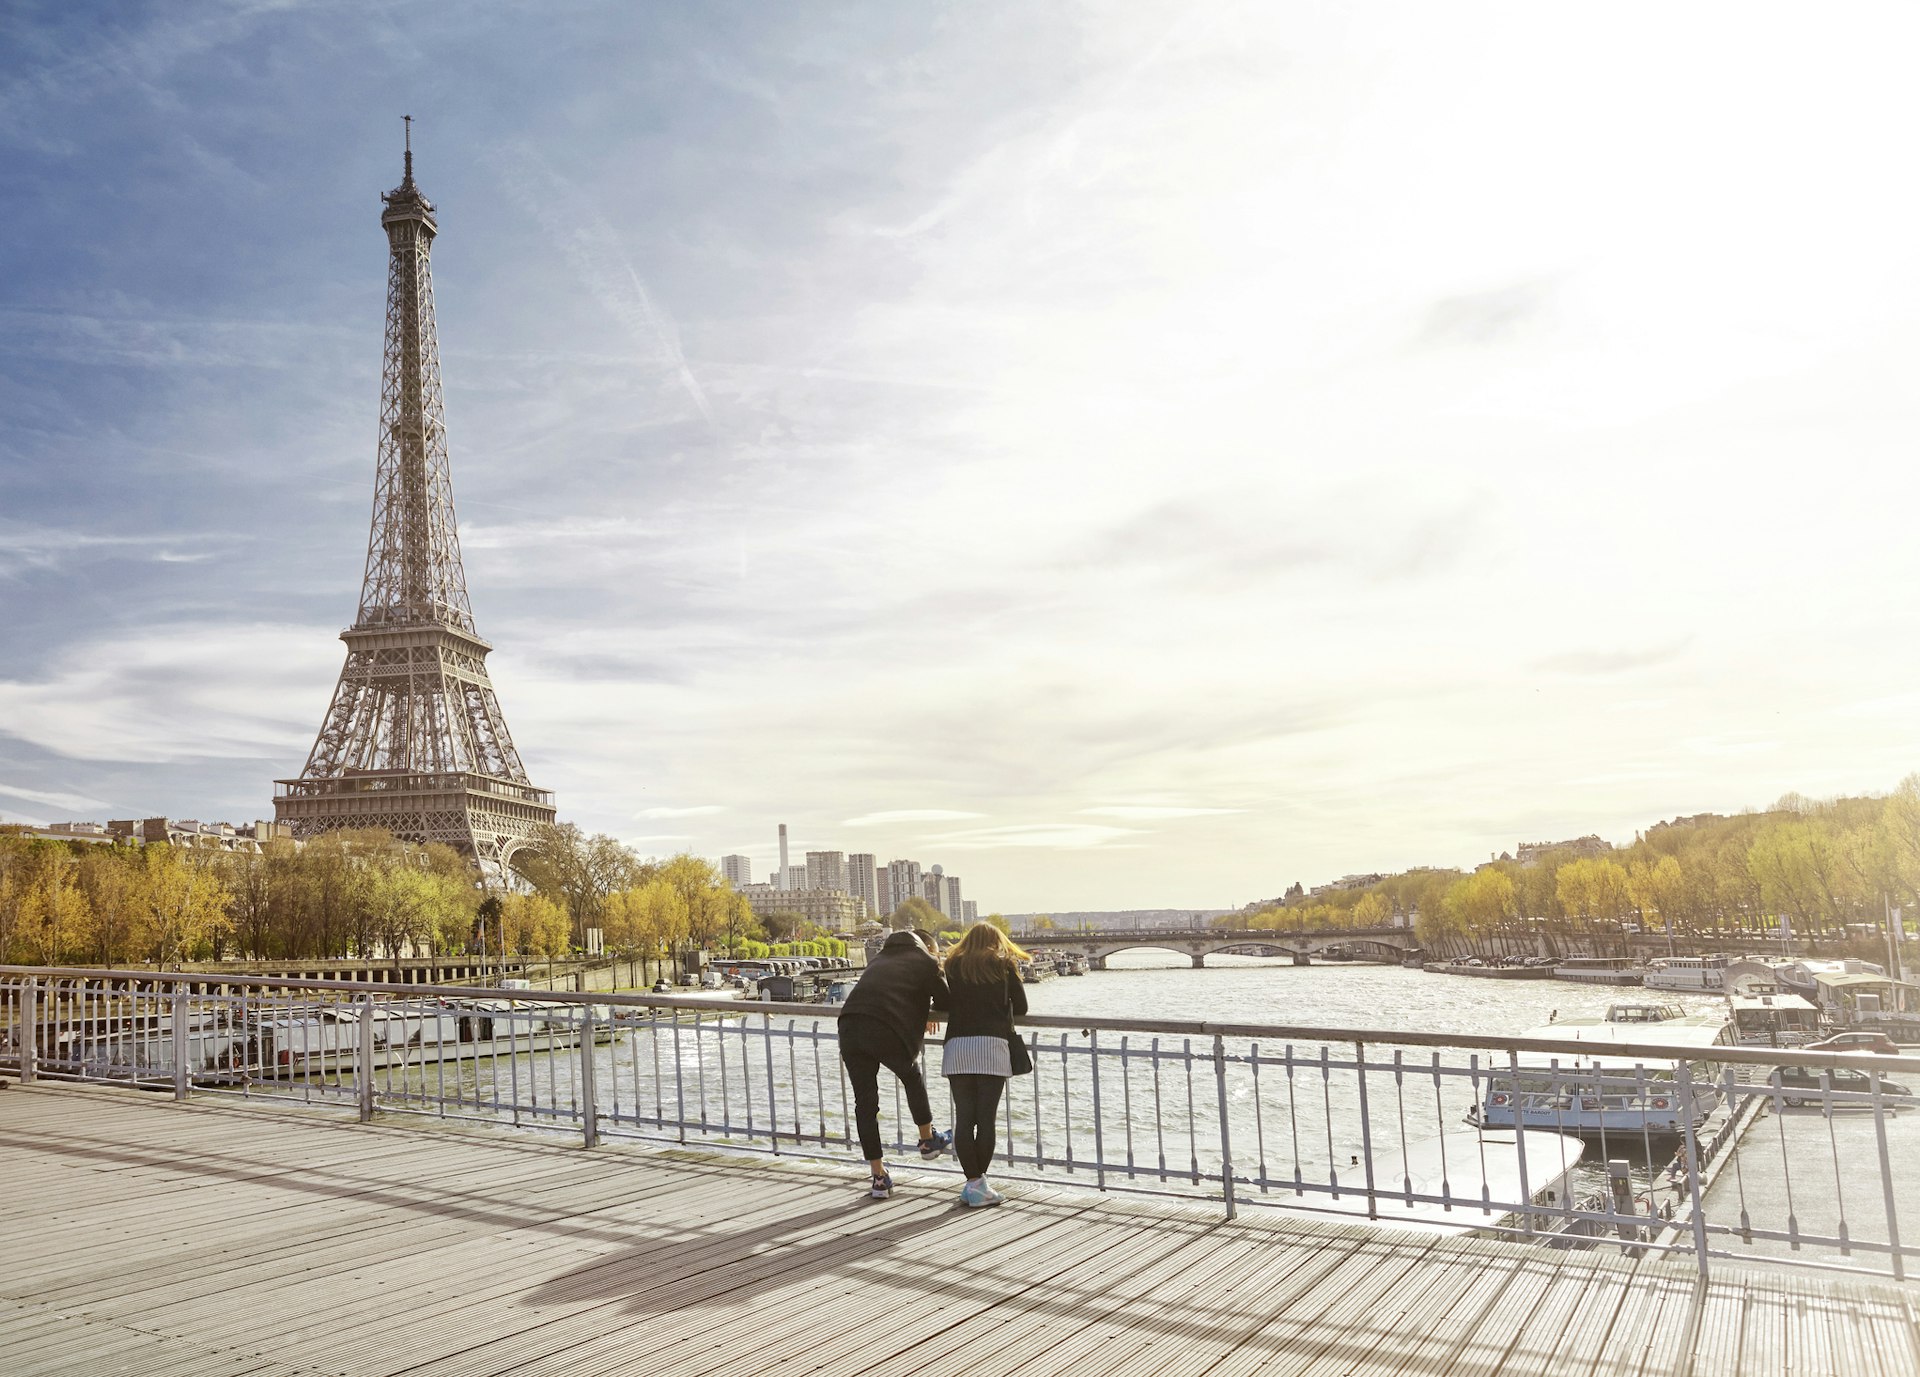 Two people lean on the edge of a bridge looking out over a river. The iconic Eiffel Tower dominates the skyline